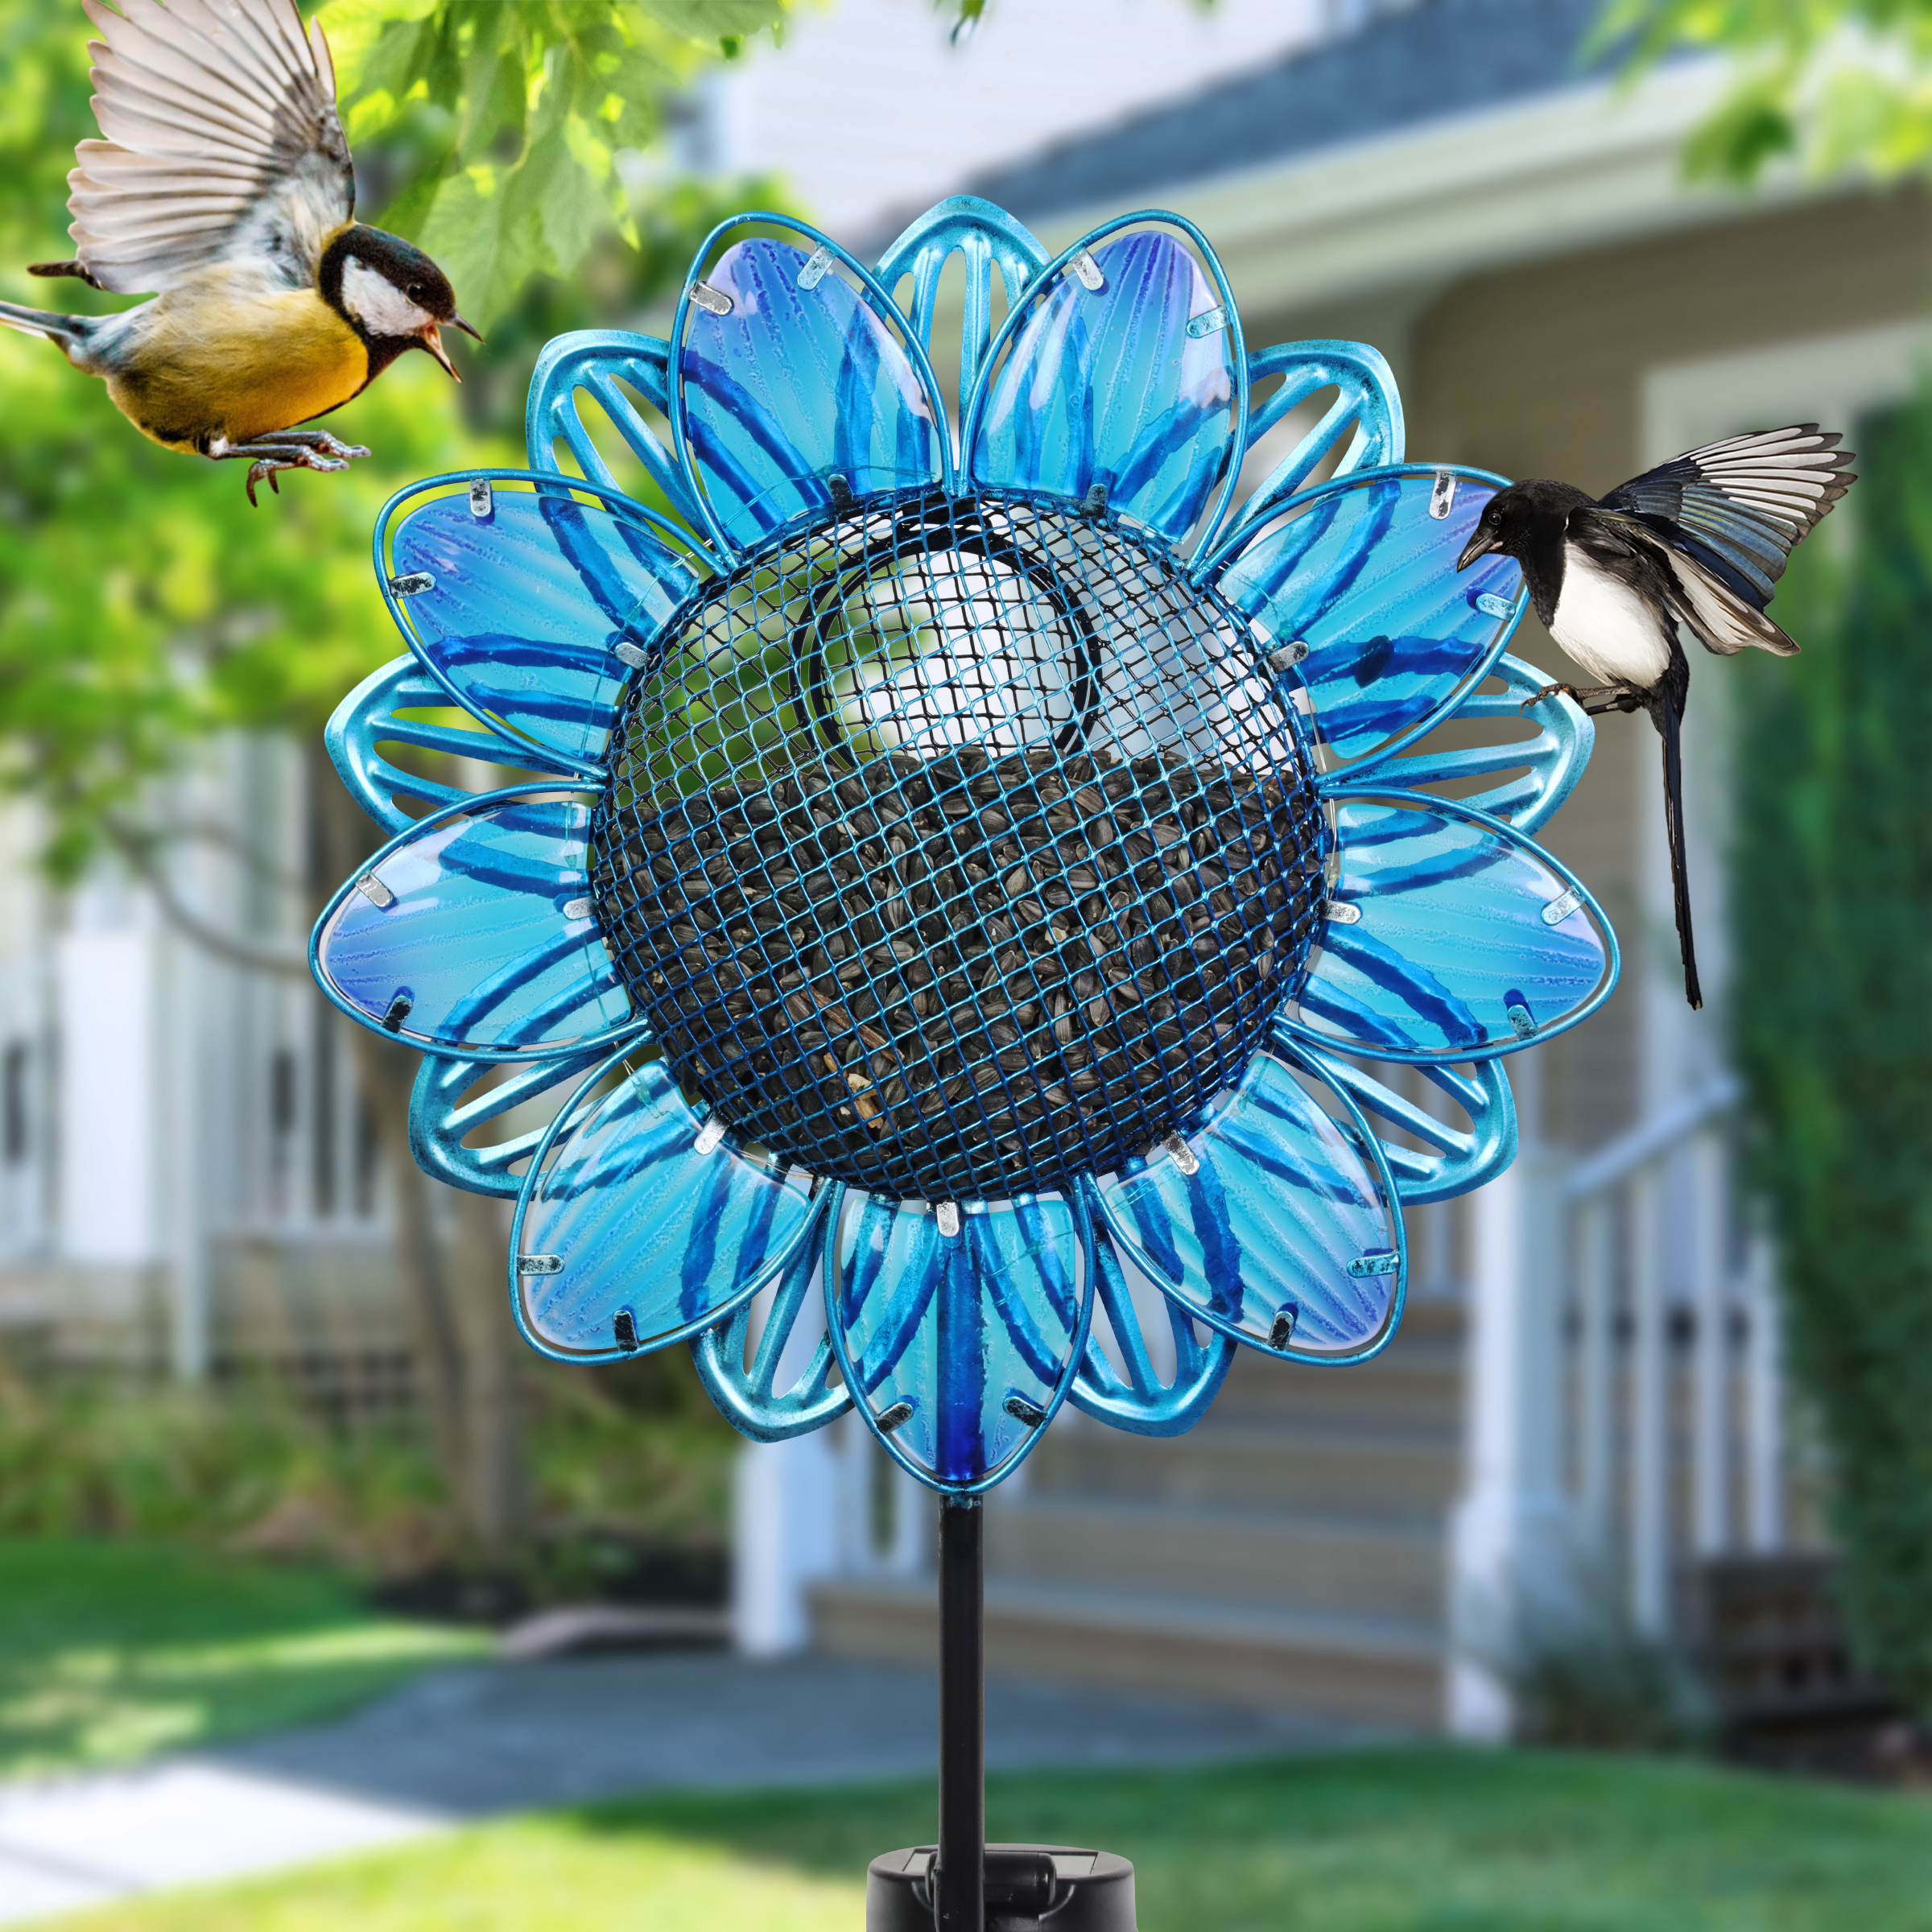 Exhart  Blue Sunflower Metal and Glass Bird Seed Feeder Solar Powered Garden Stake, 11 by 36 inches - image 4 of 7